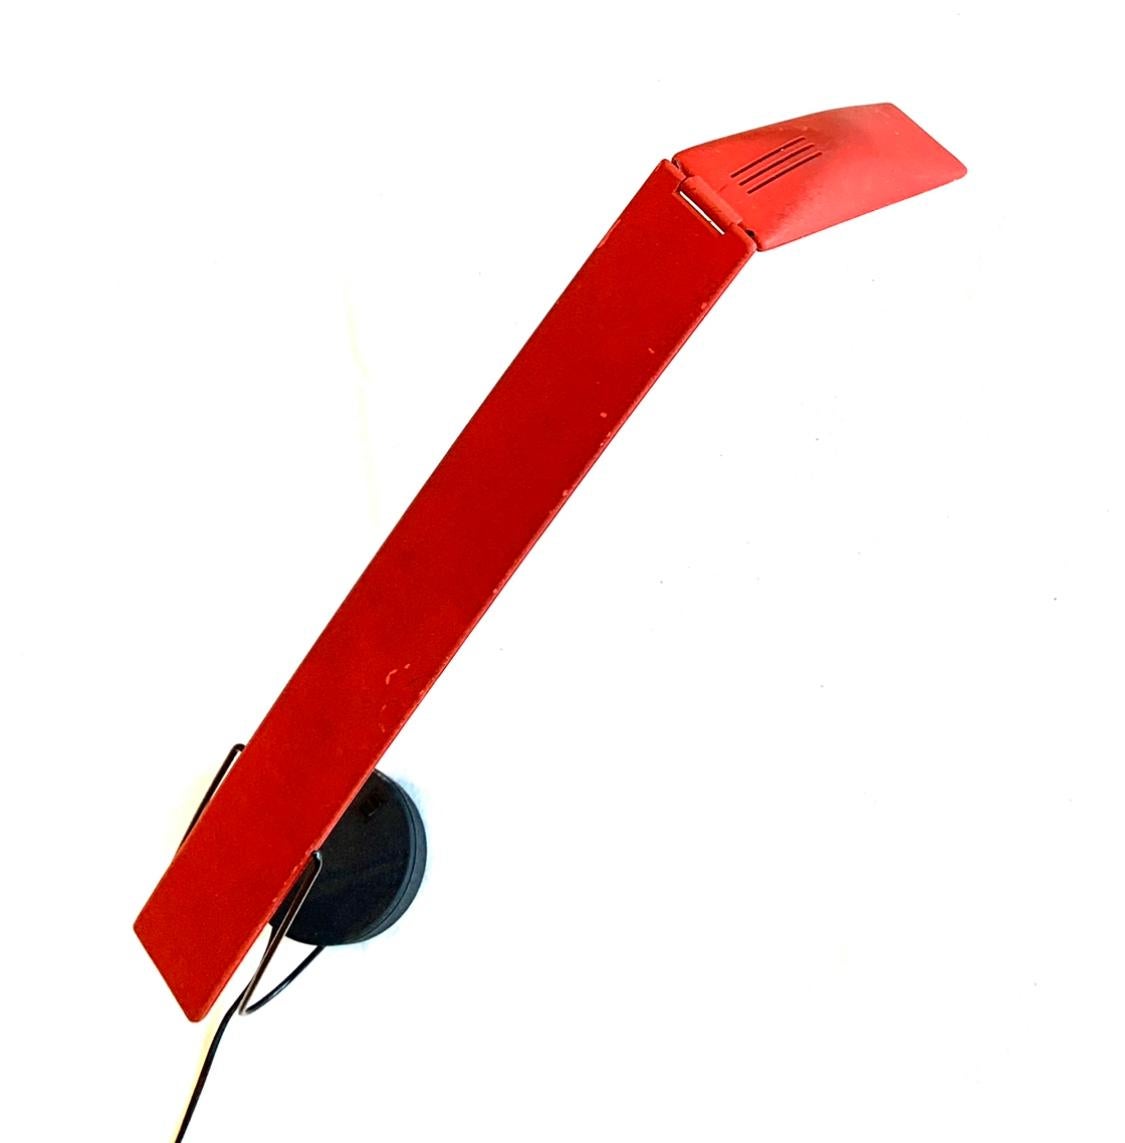 Dove lamp.
Designed by Mario Barbaglia and Marco Colombo for PAF Studio, Milan, Italy.
This iconic lamp is made from red/black plastic and metal.
Plastic structure with metal supports, height adjustable and rotates on its base.
Halogen lamp with